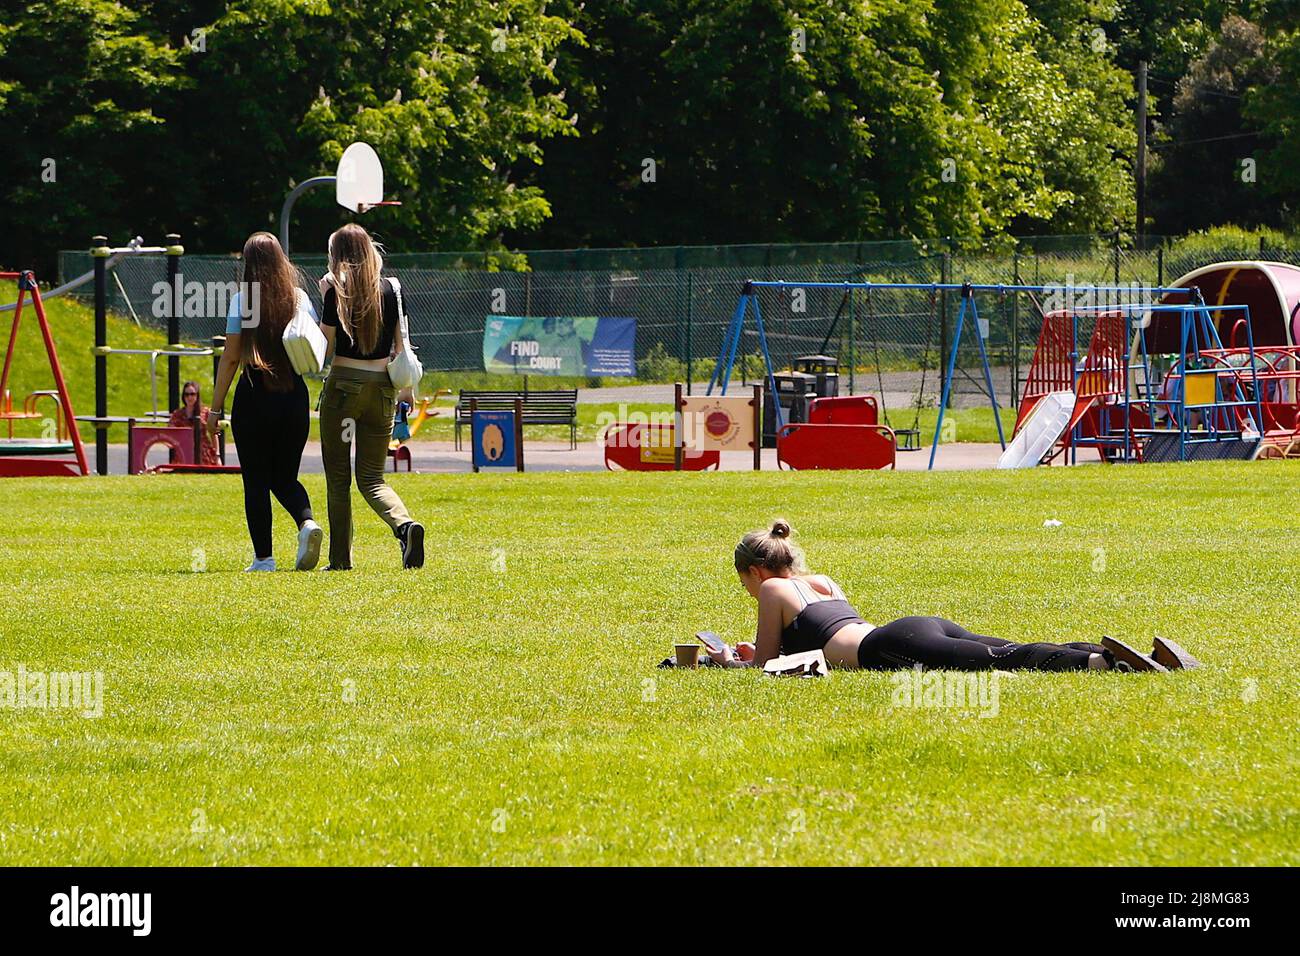 Tenterden, Kent, UK. 17 May, 2022. UK Weather: Sunny afternoon in the Kent town of Tenterden as temperatures are expected to reach the mid twenties. Sunbather enjoys the hot weather in the park. Photo Credit: Paul Lawrenson /Alamy Live News Stock Photo